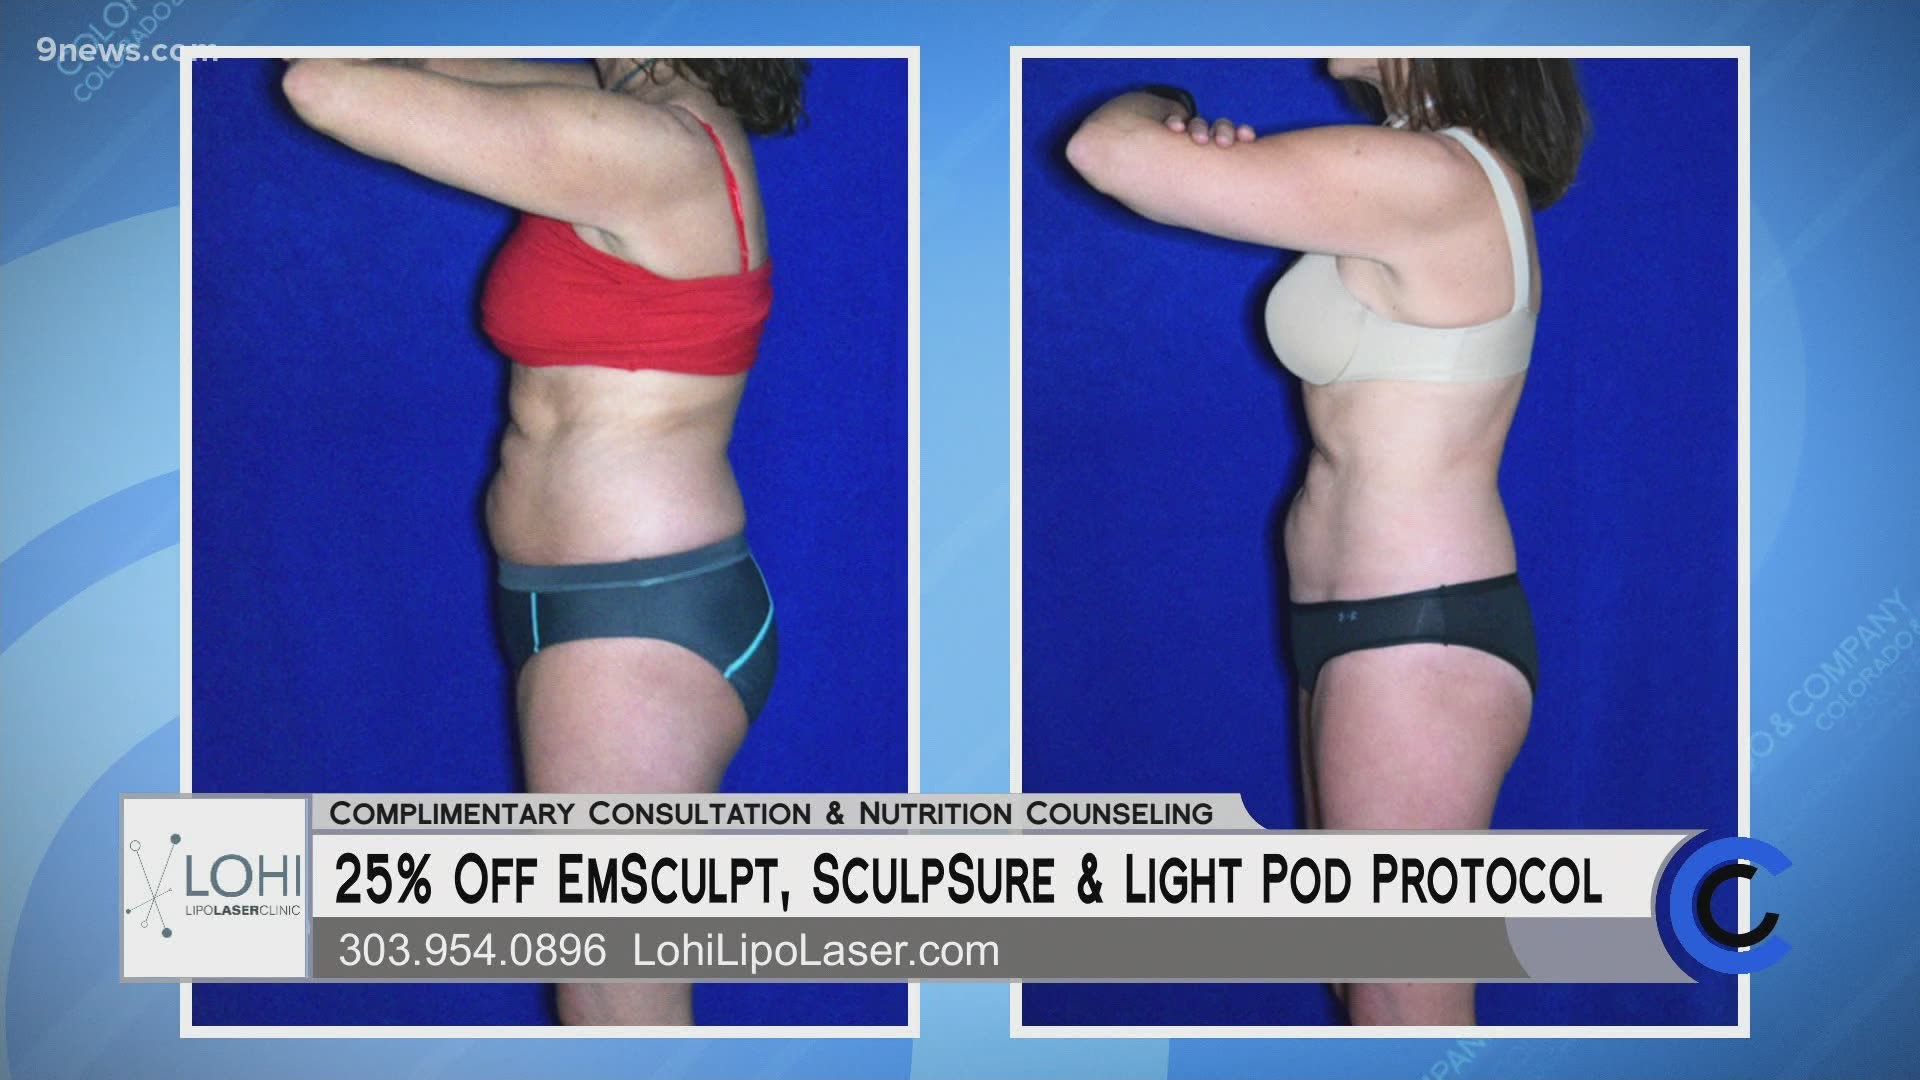 Book your appointment at Lohi Lipo Laser by calling 303.954.0896 or visit LohiLipoLaser.com. Get started with three of their top techs and get 25% off!